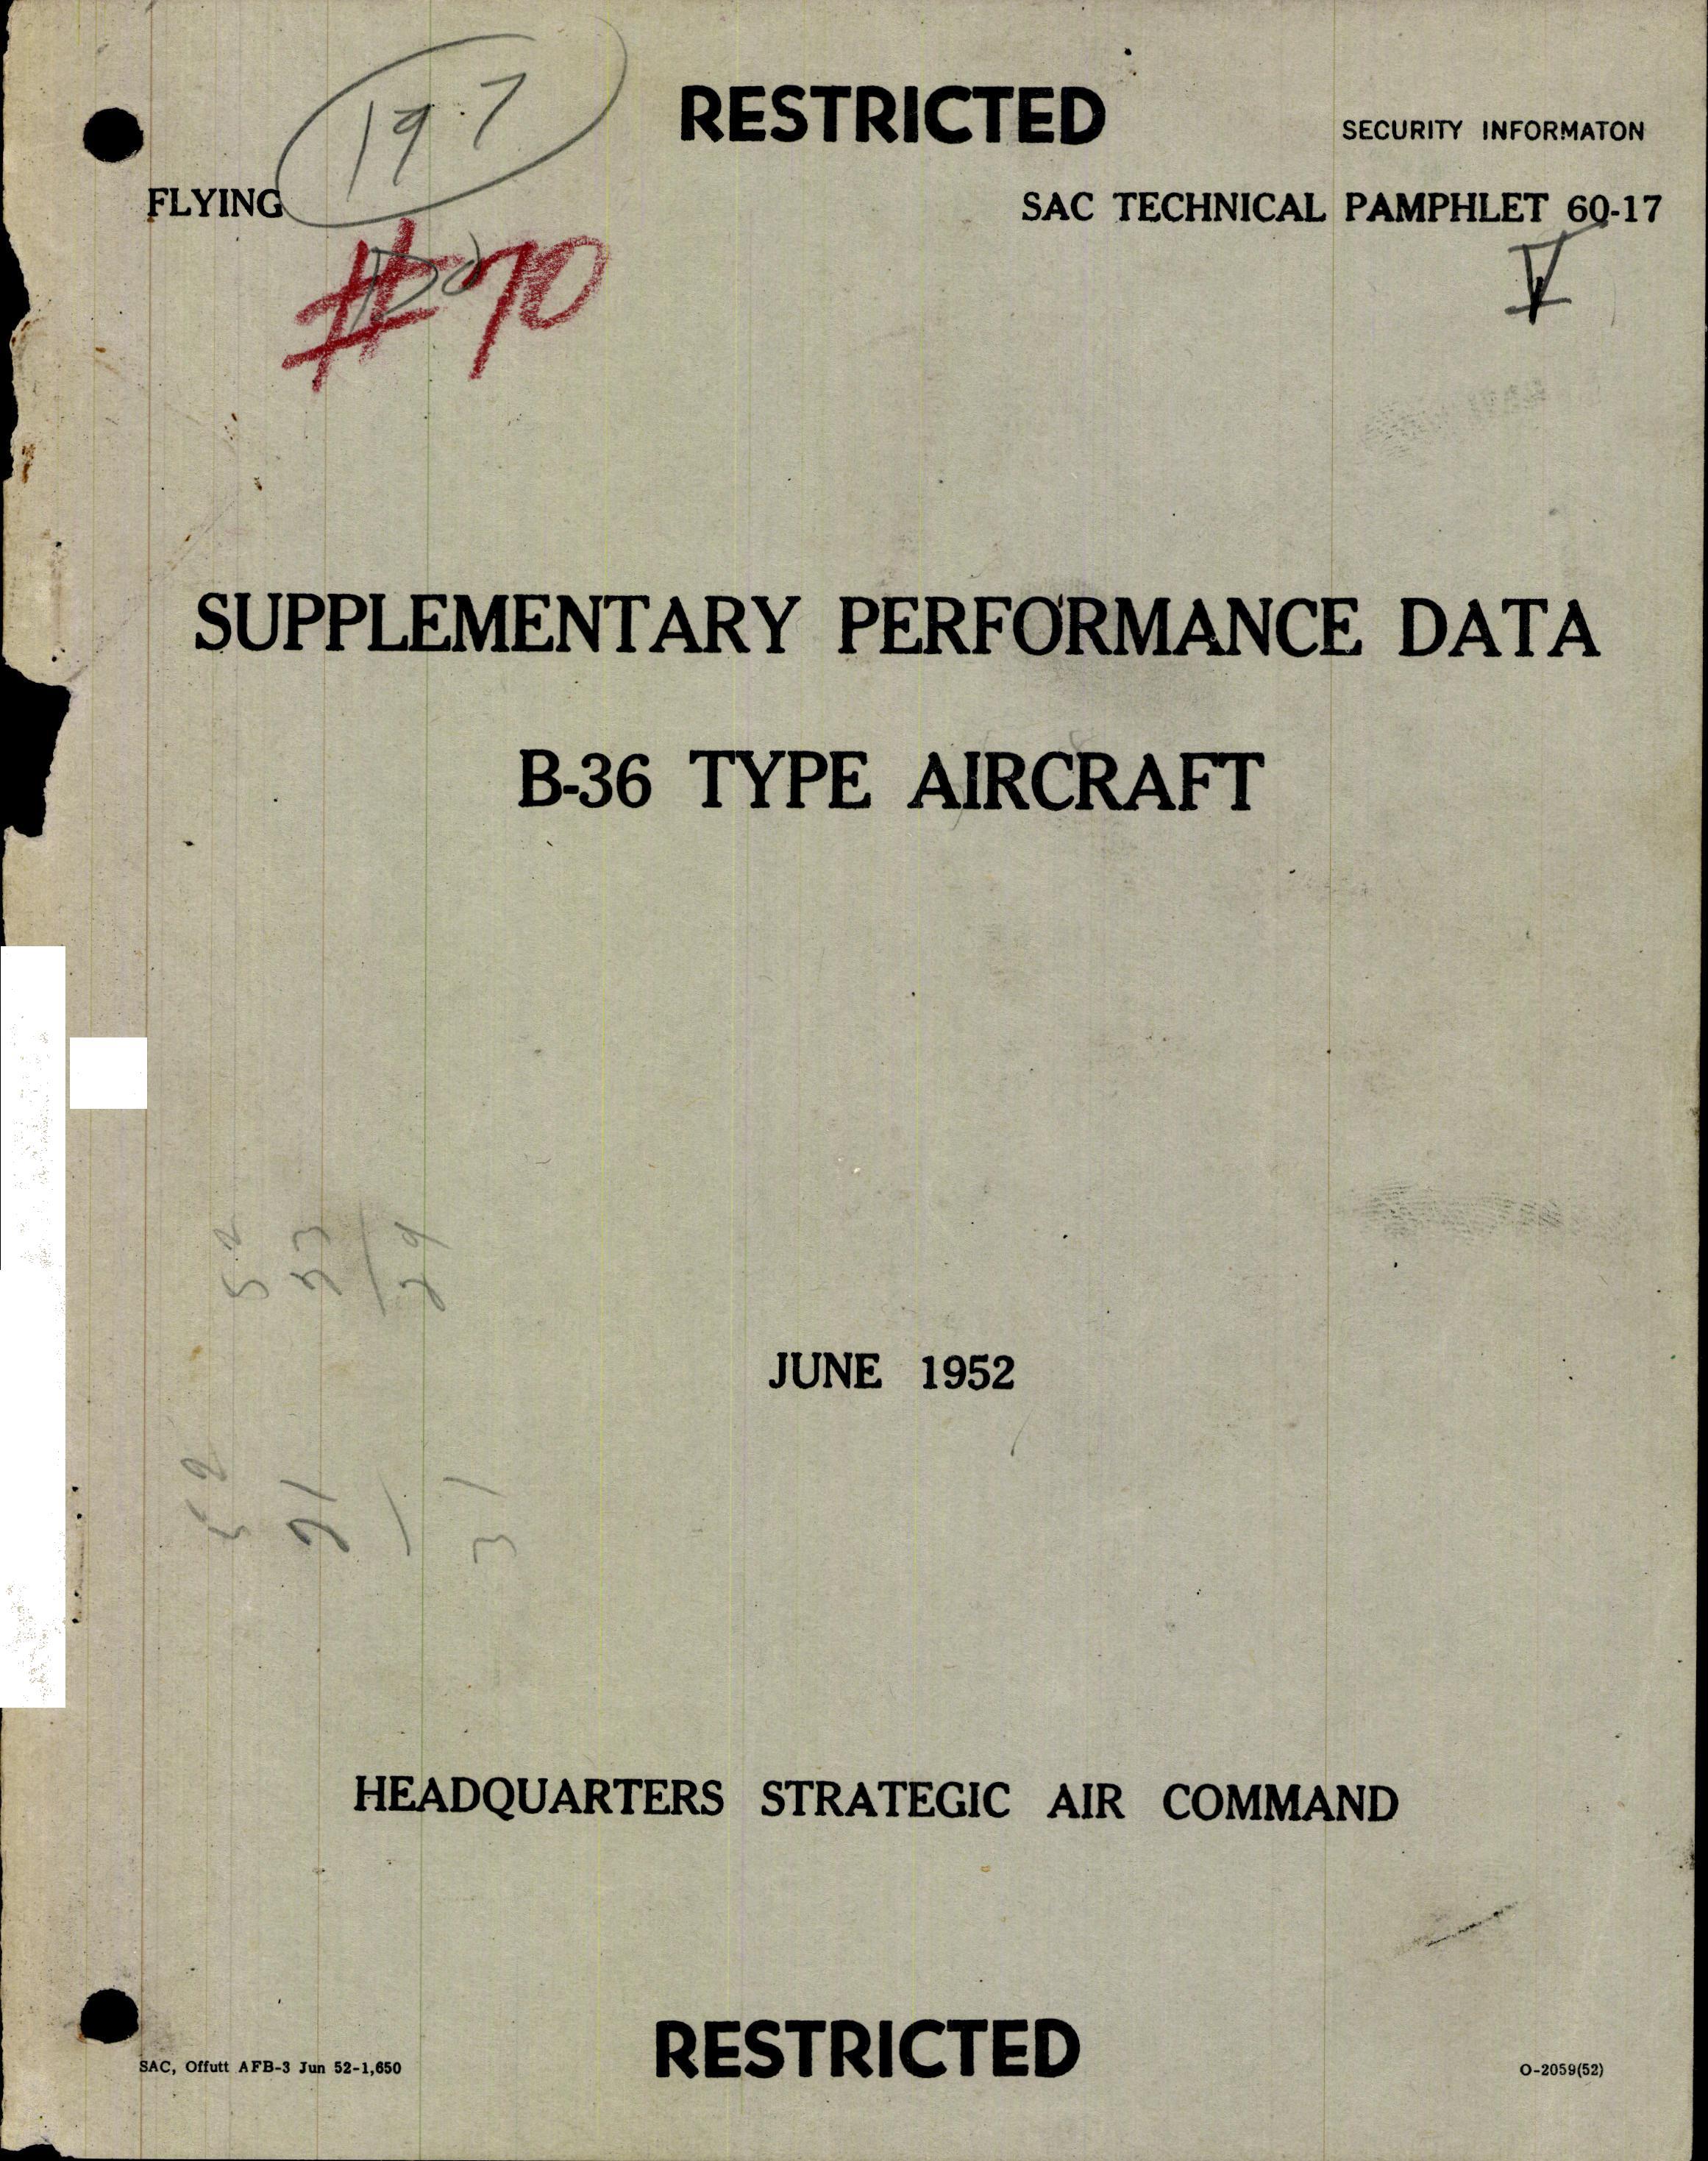 Sample page 5 from AirCorps Library document: Supplementary Performance Data for B-36 Type Aircraft